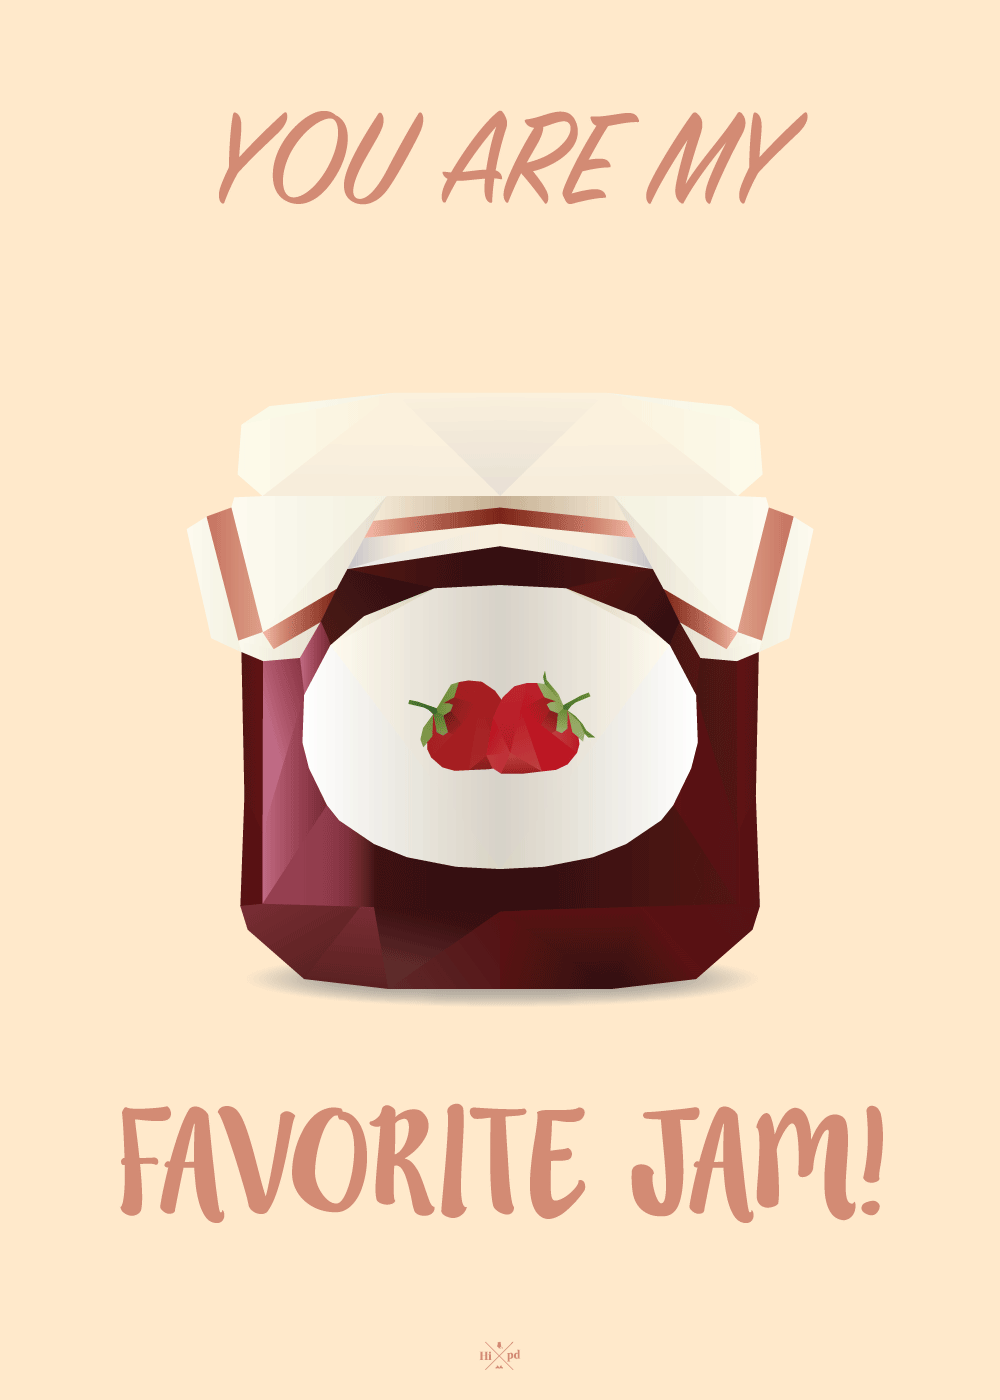 You are my favorite jam